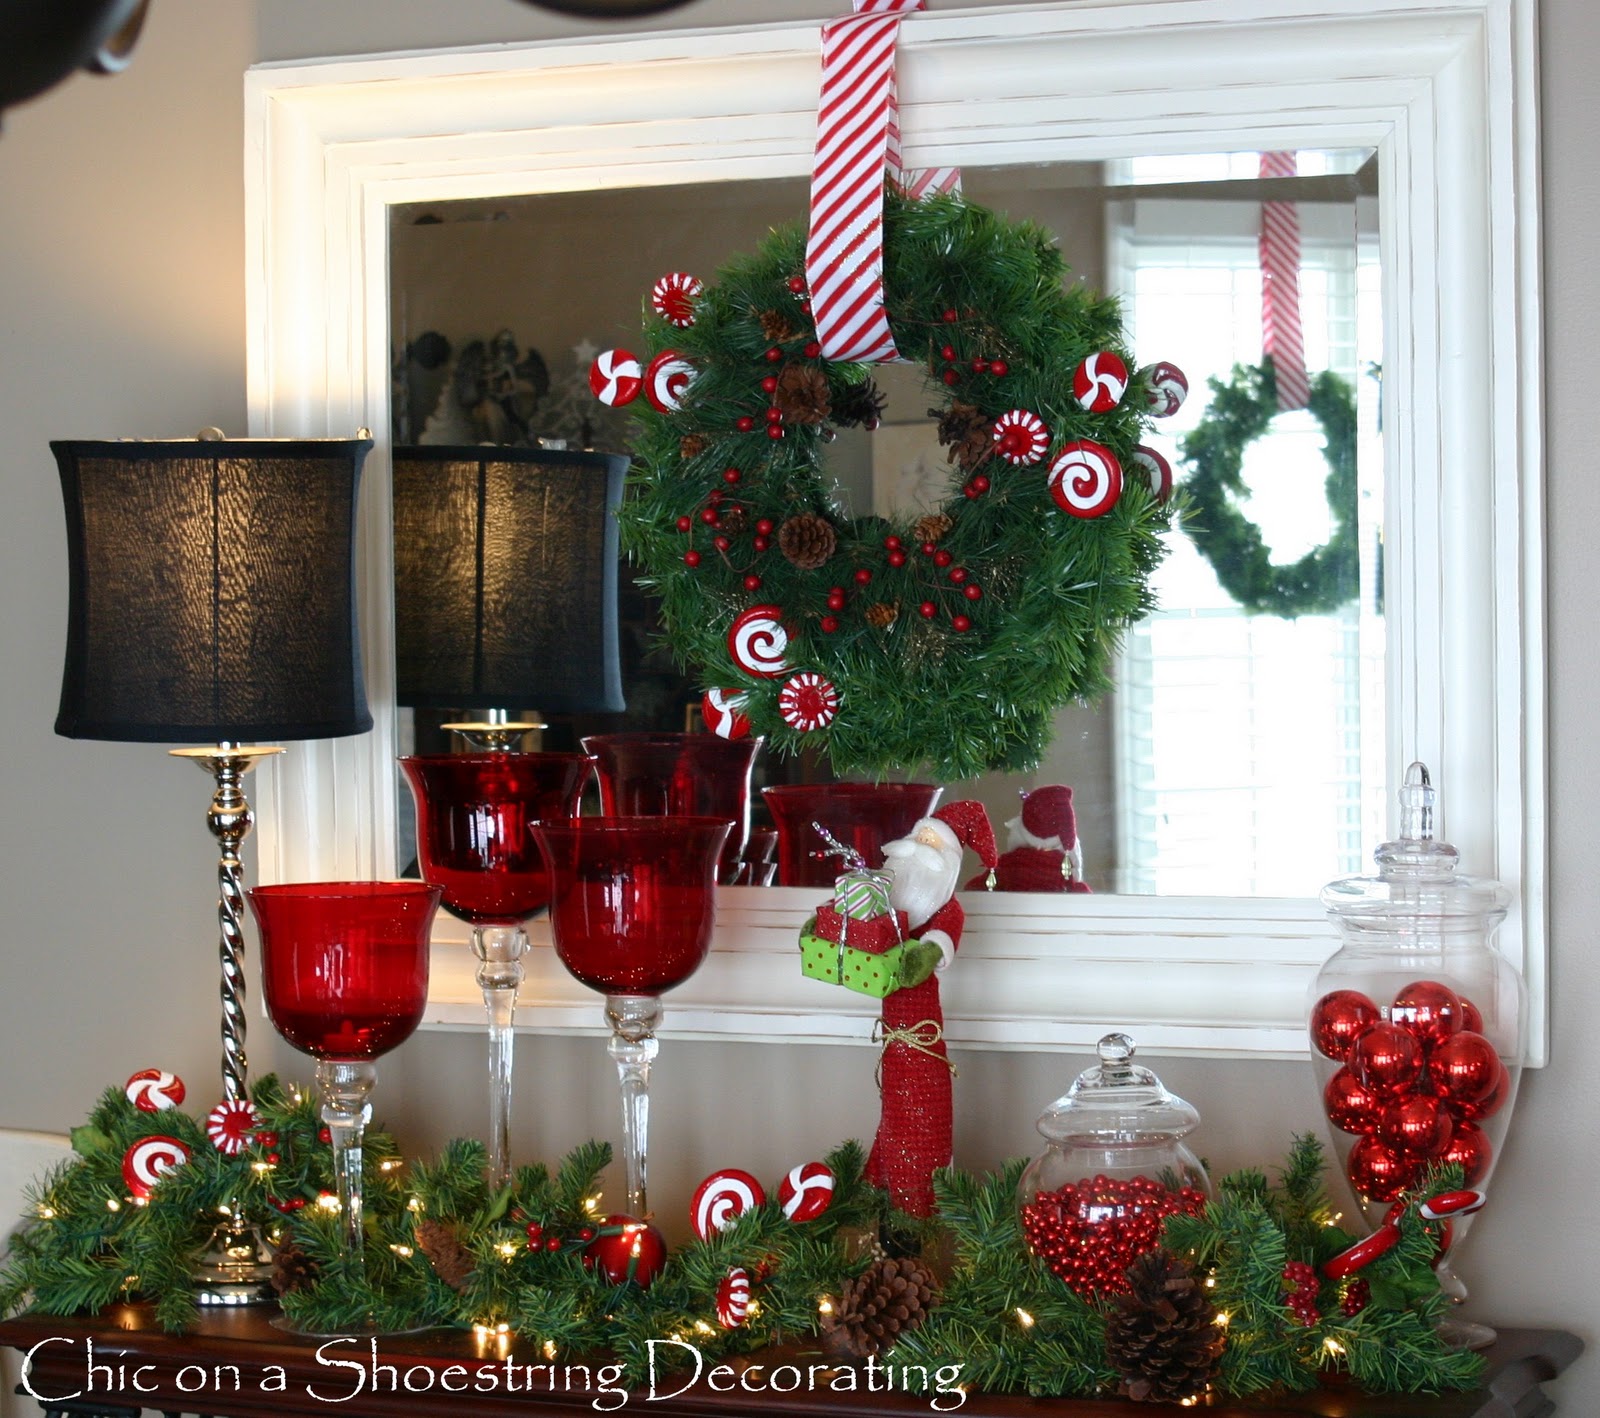 Chic on a Shoestring Decorating: Christmas Vignette #1 Red & White